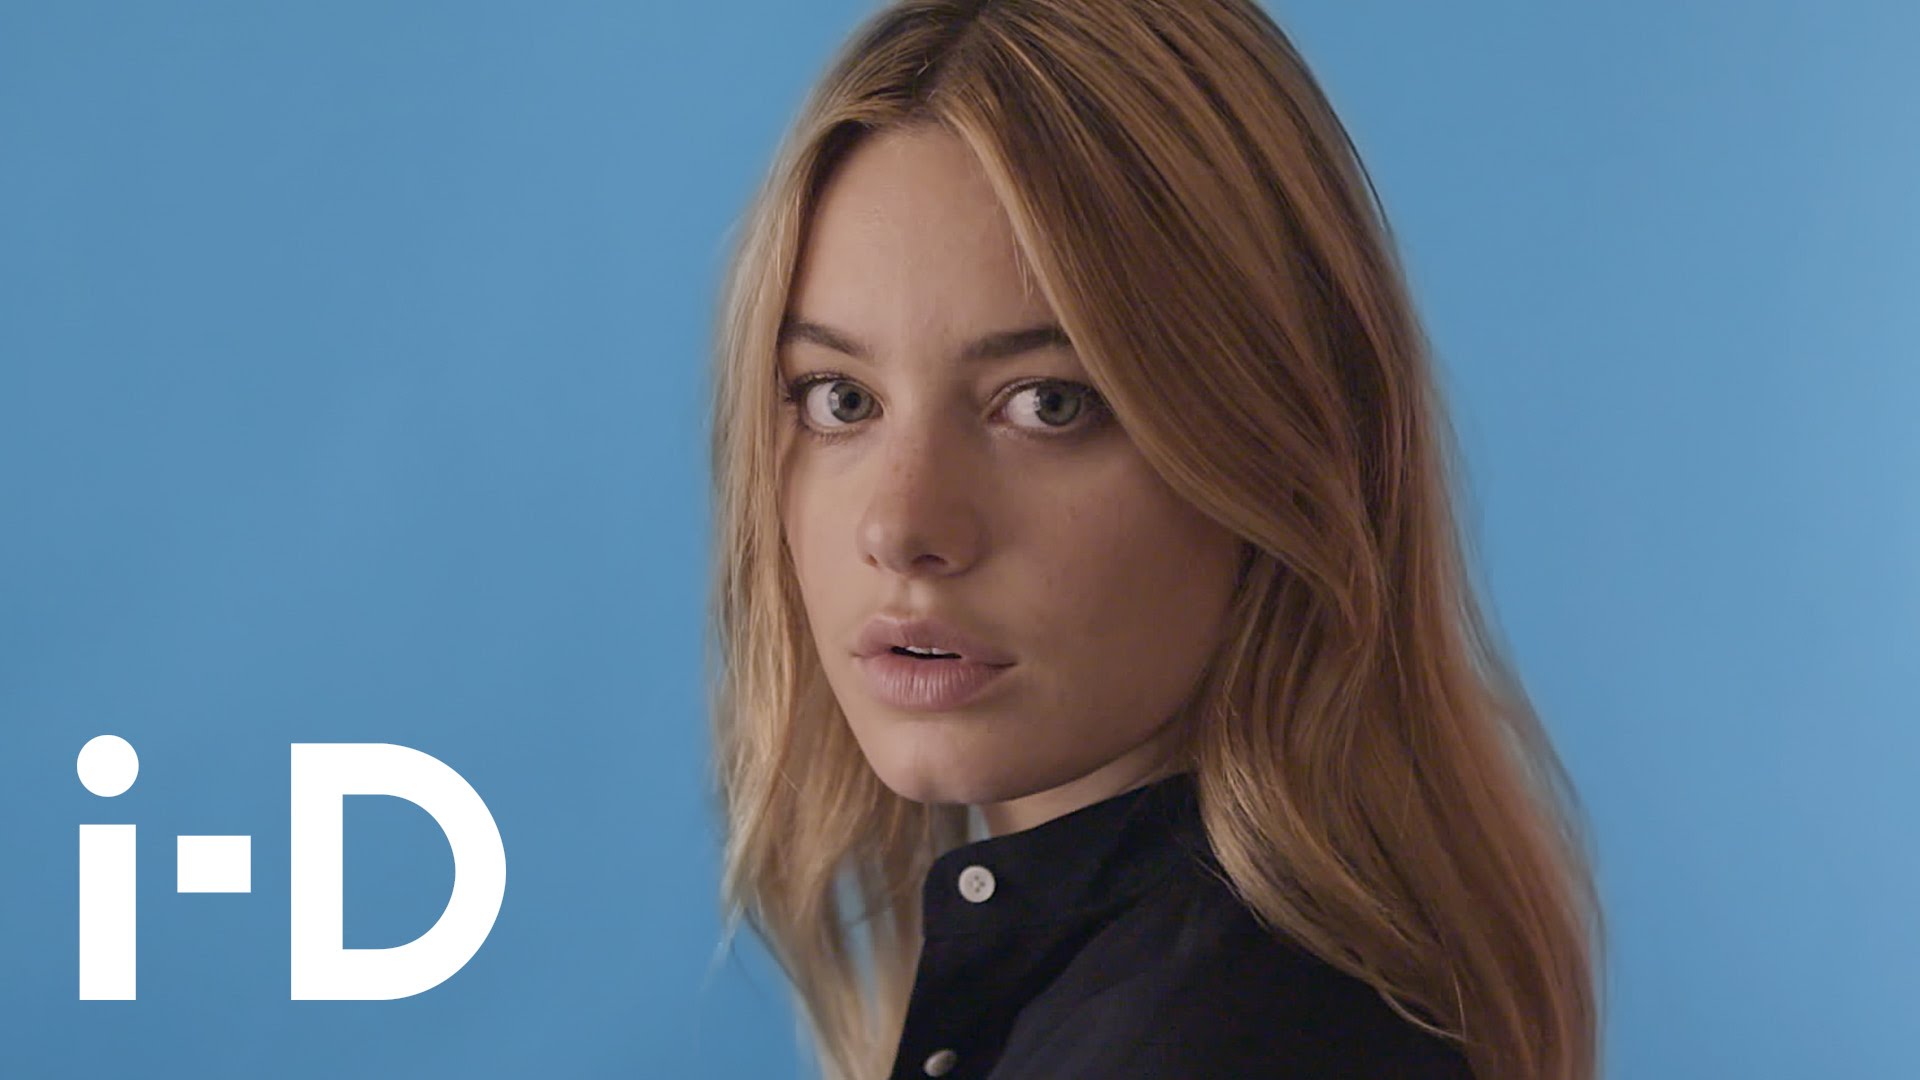 Camille rowe face wallpaper